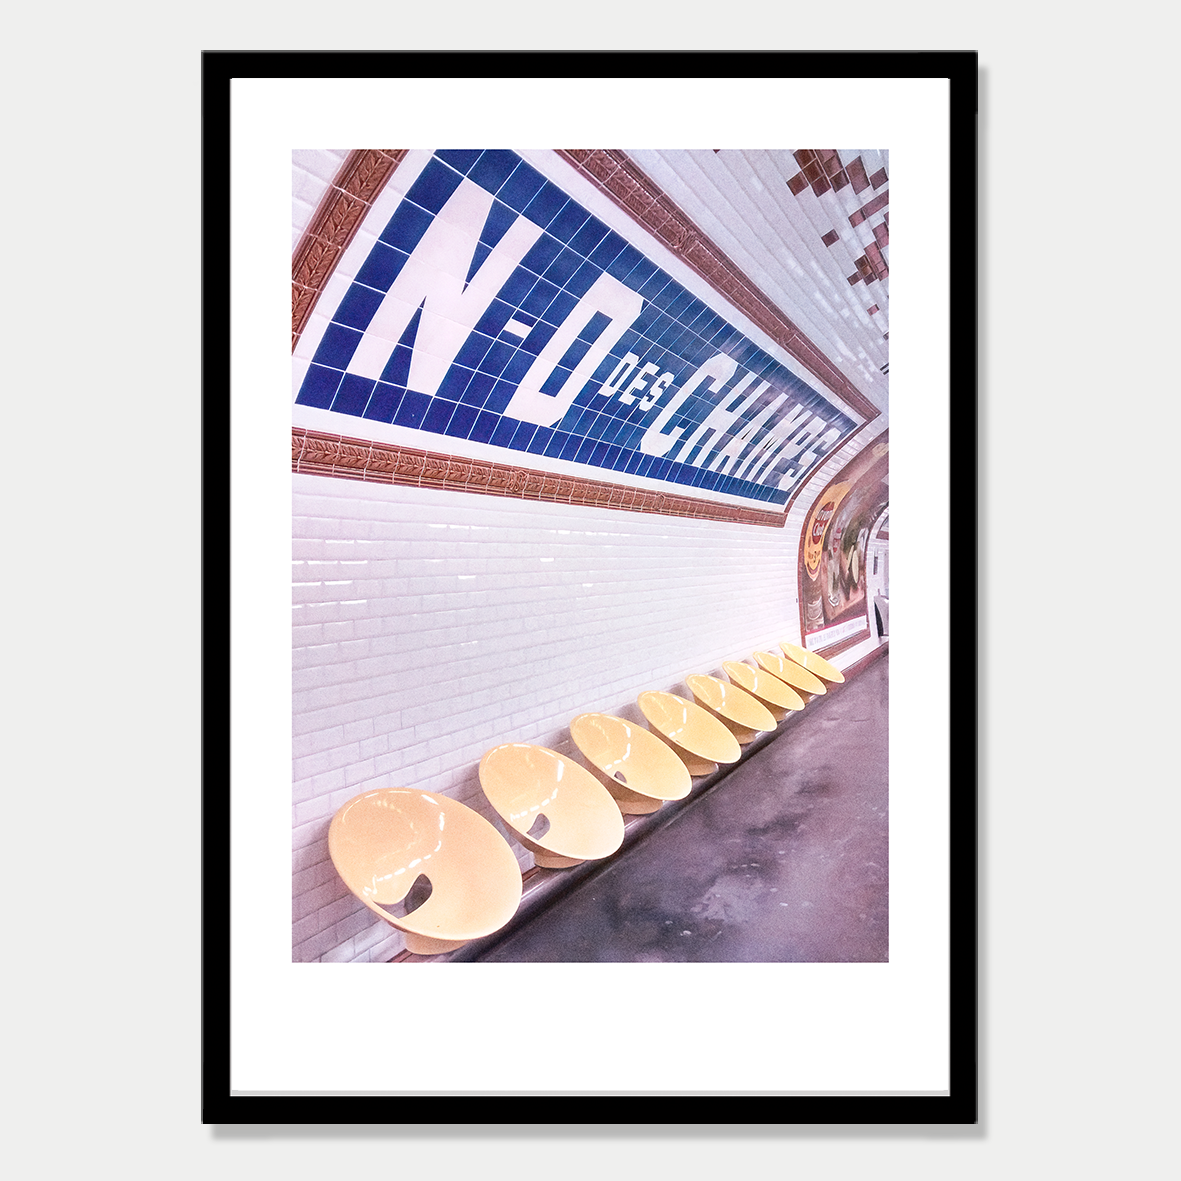 Nom Des Champs Subway Station in Paris, Still Life Photographic Art Print in a Skinny Black Frame